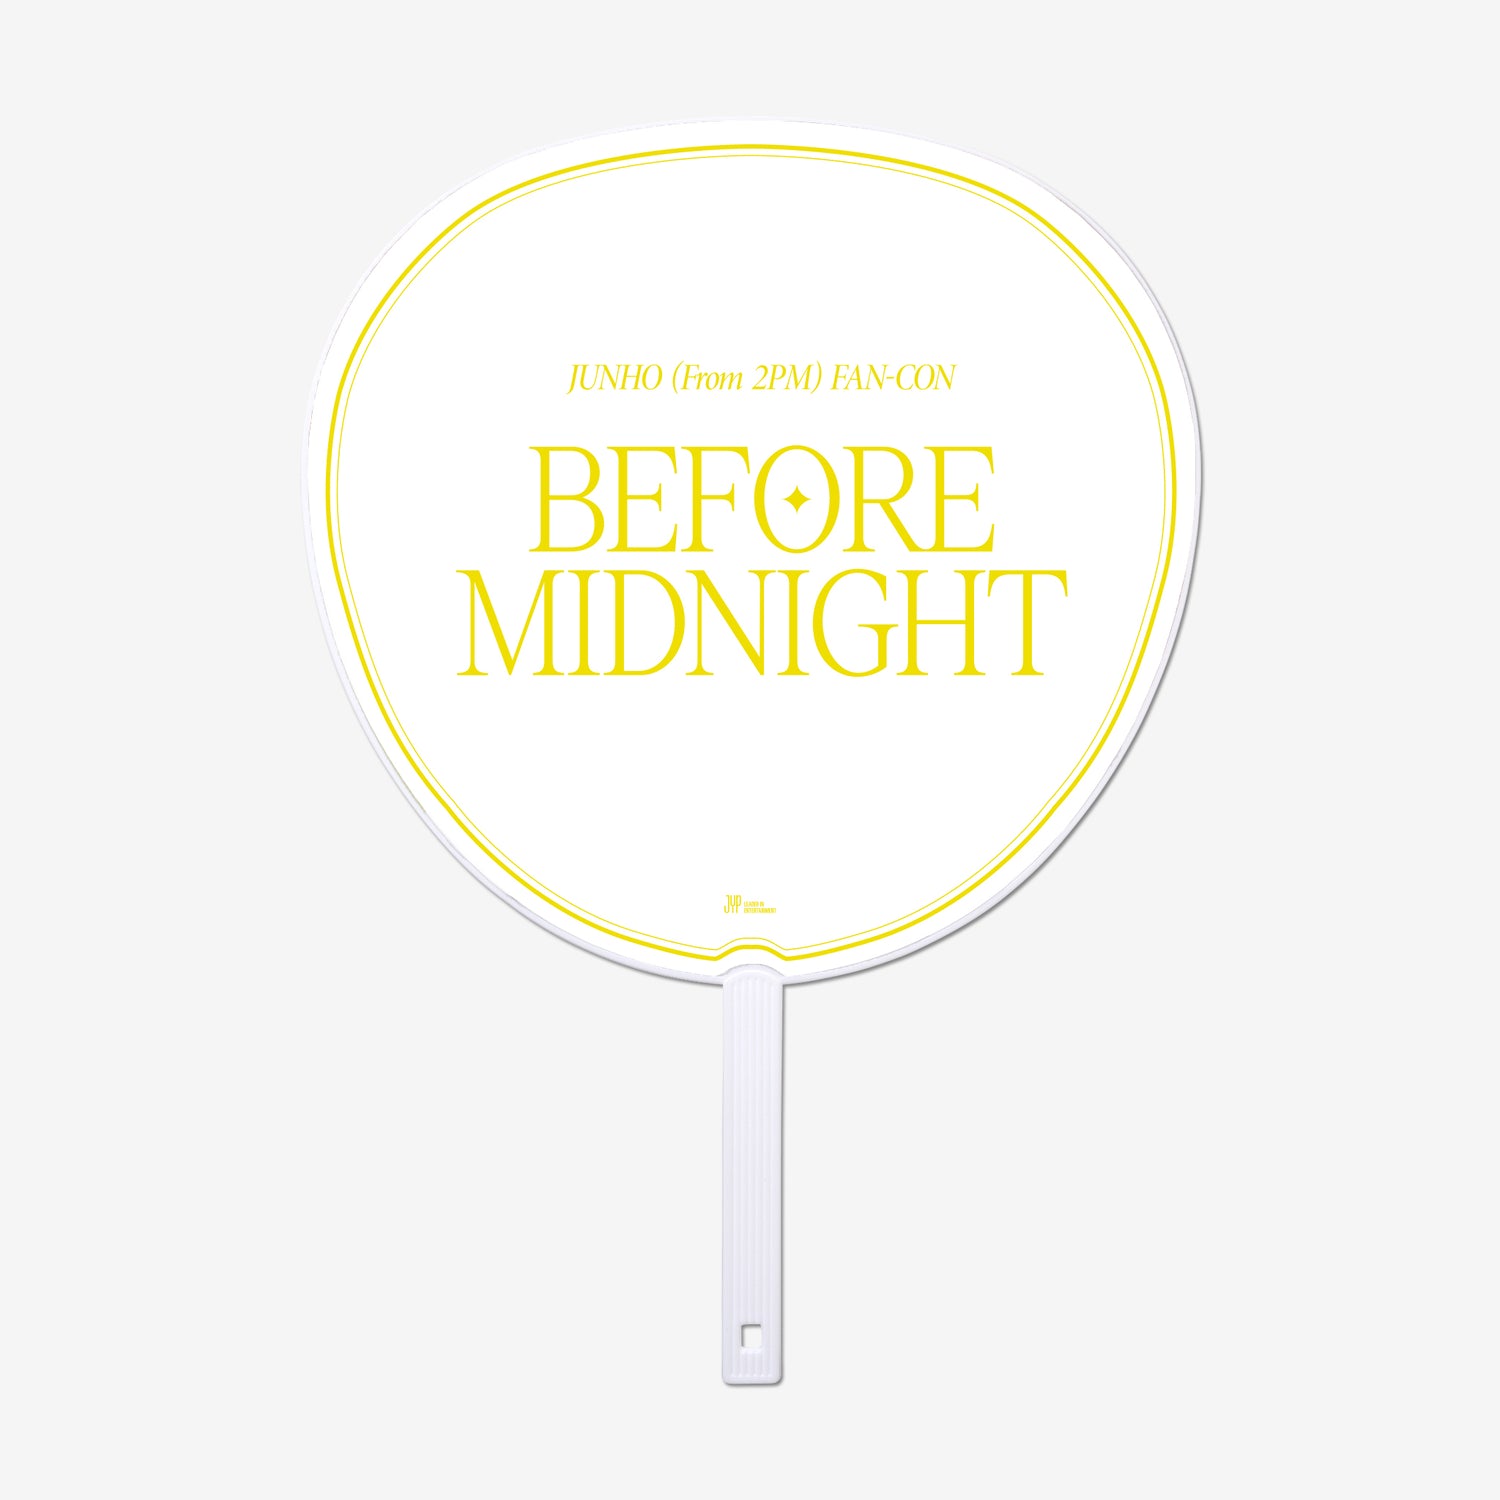 IMAGE PICKET【B】『JUNHO (From 2PM) FAN-CON -Before Midnight-』